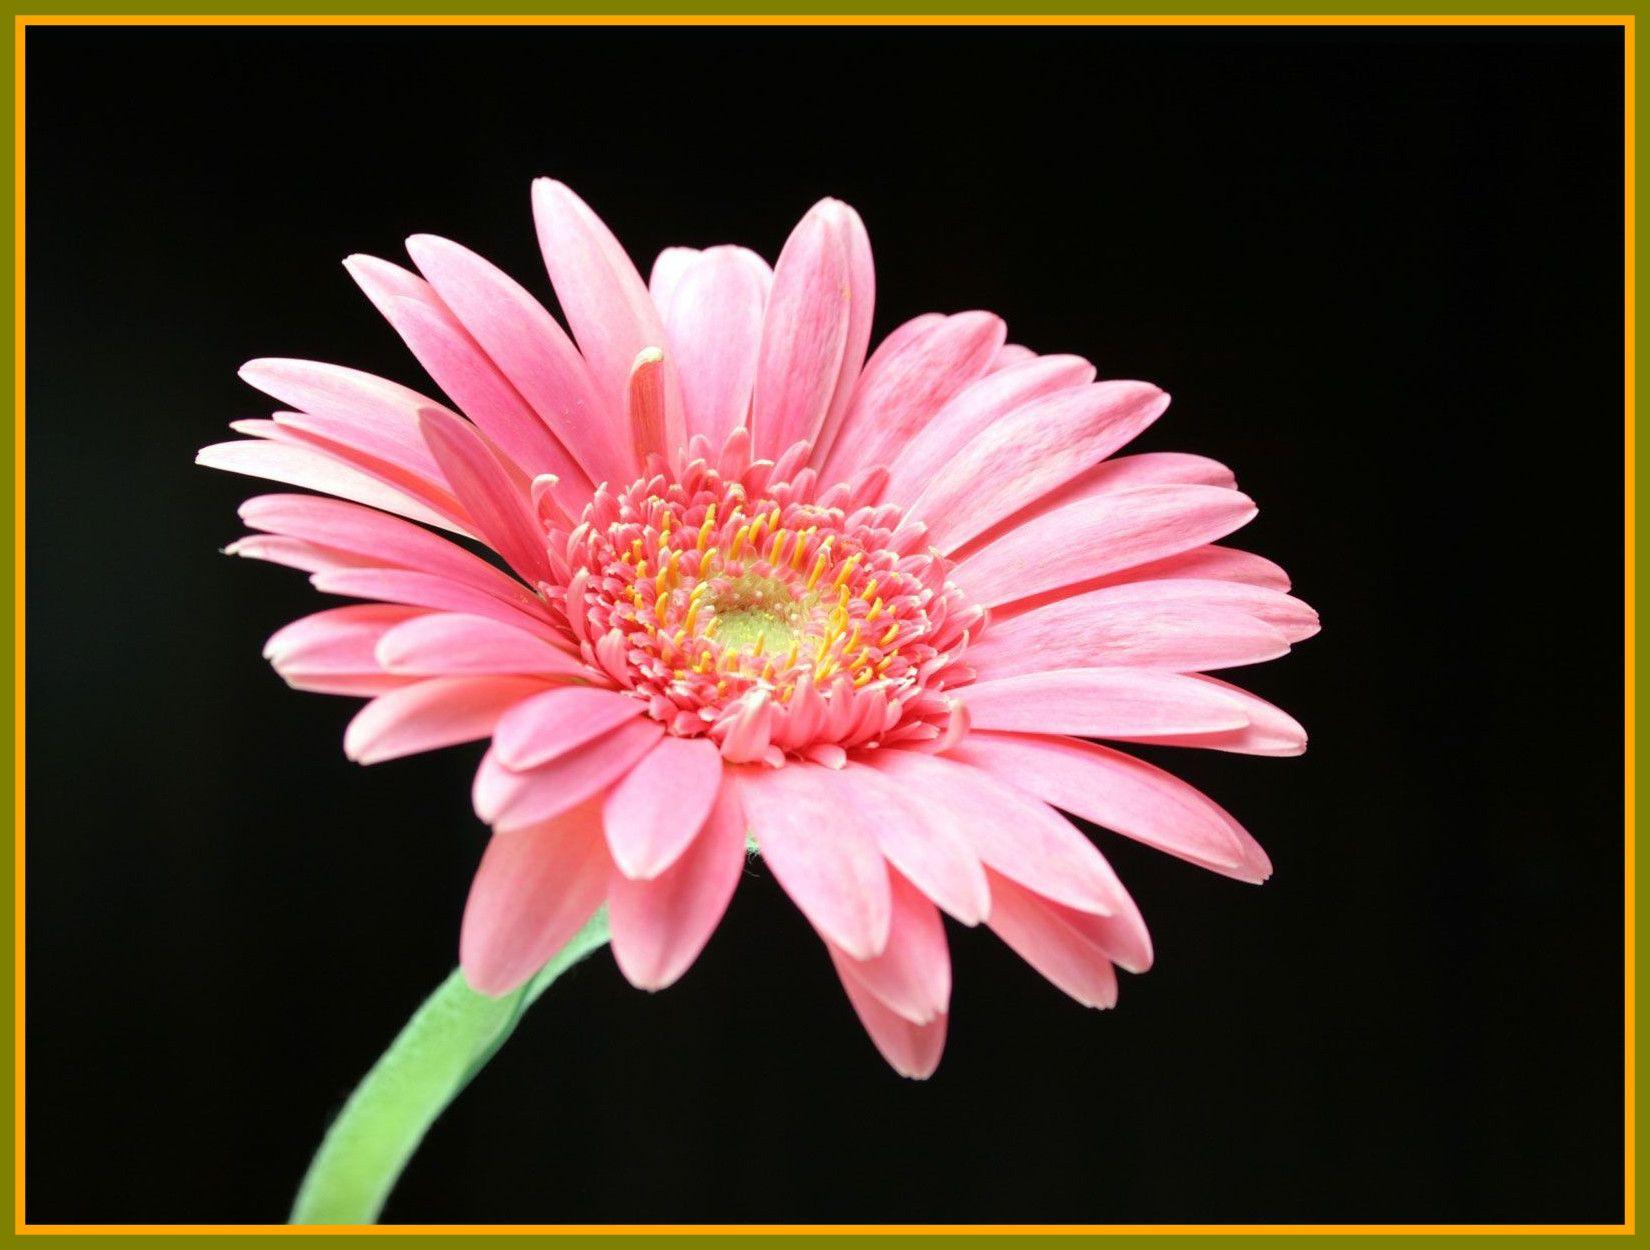 Best Pink Daisy HD Draw Image For Flower Wallpaper Ideas And Trends